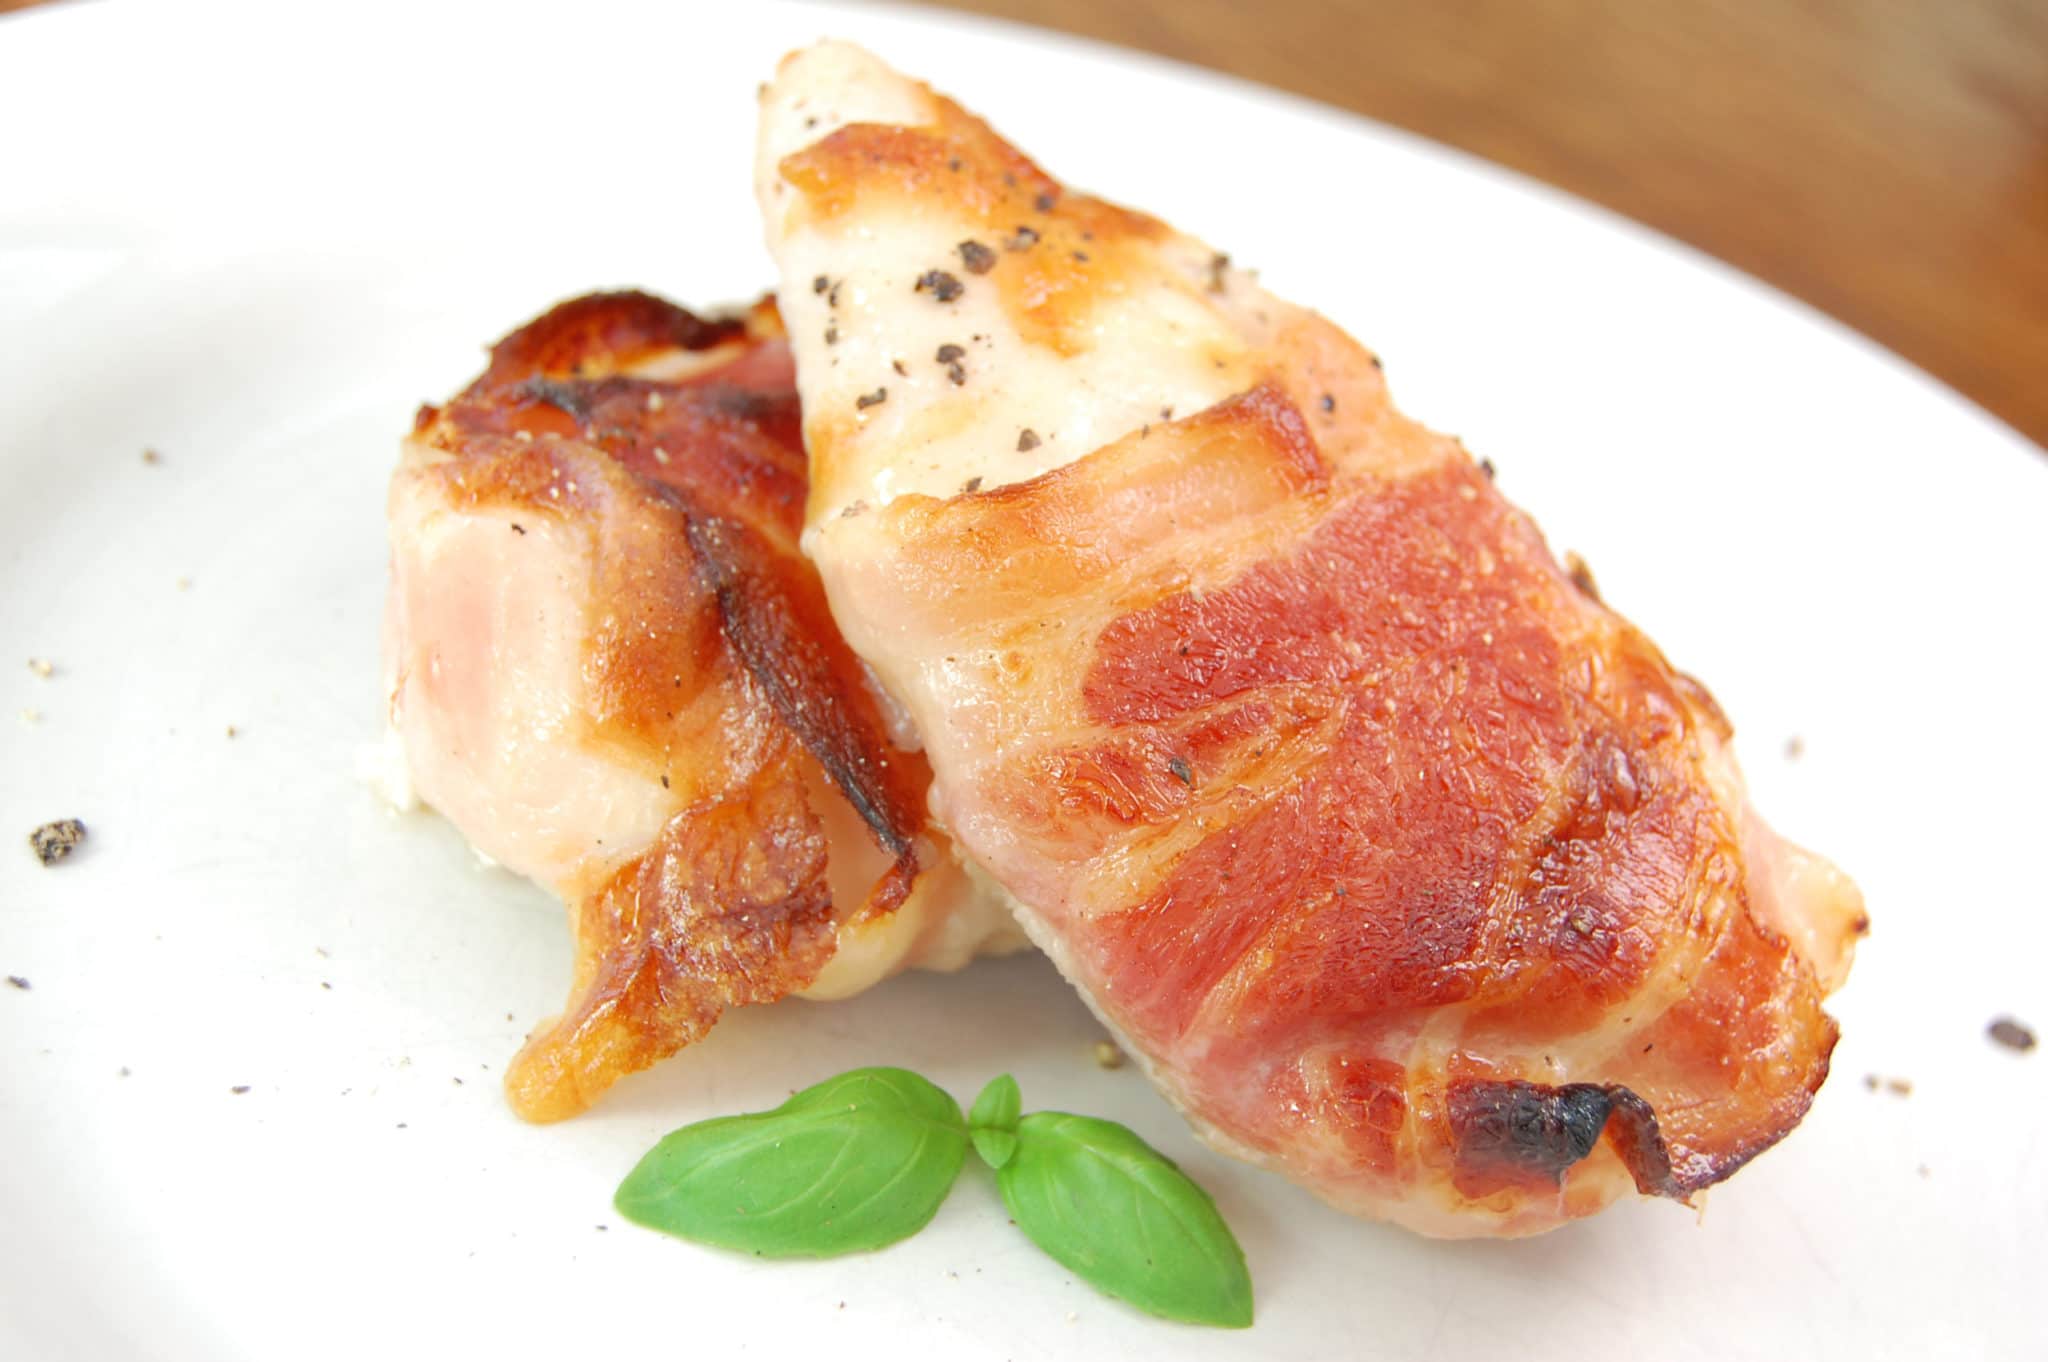 Smoked Bacon Wrapped Chicken Breast Recipe